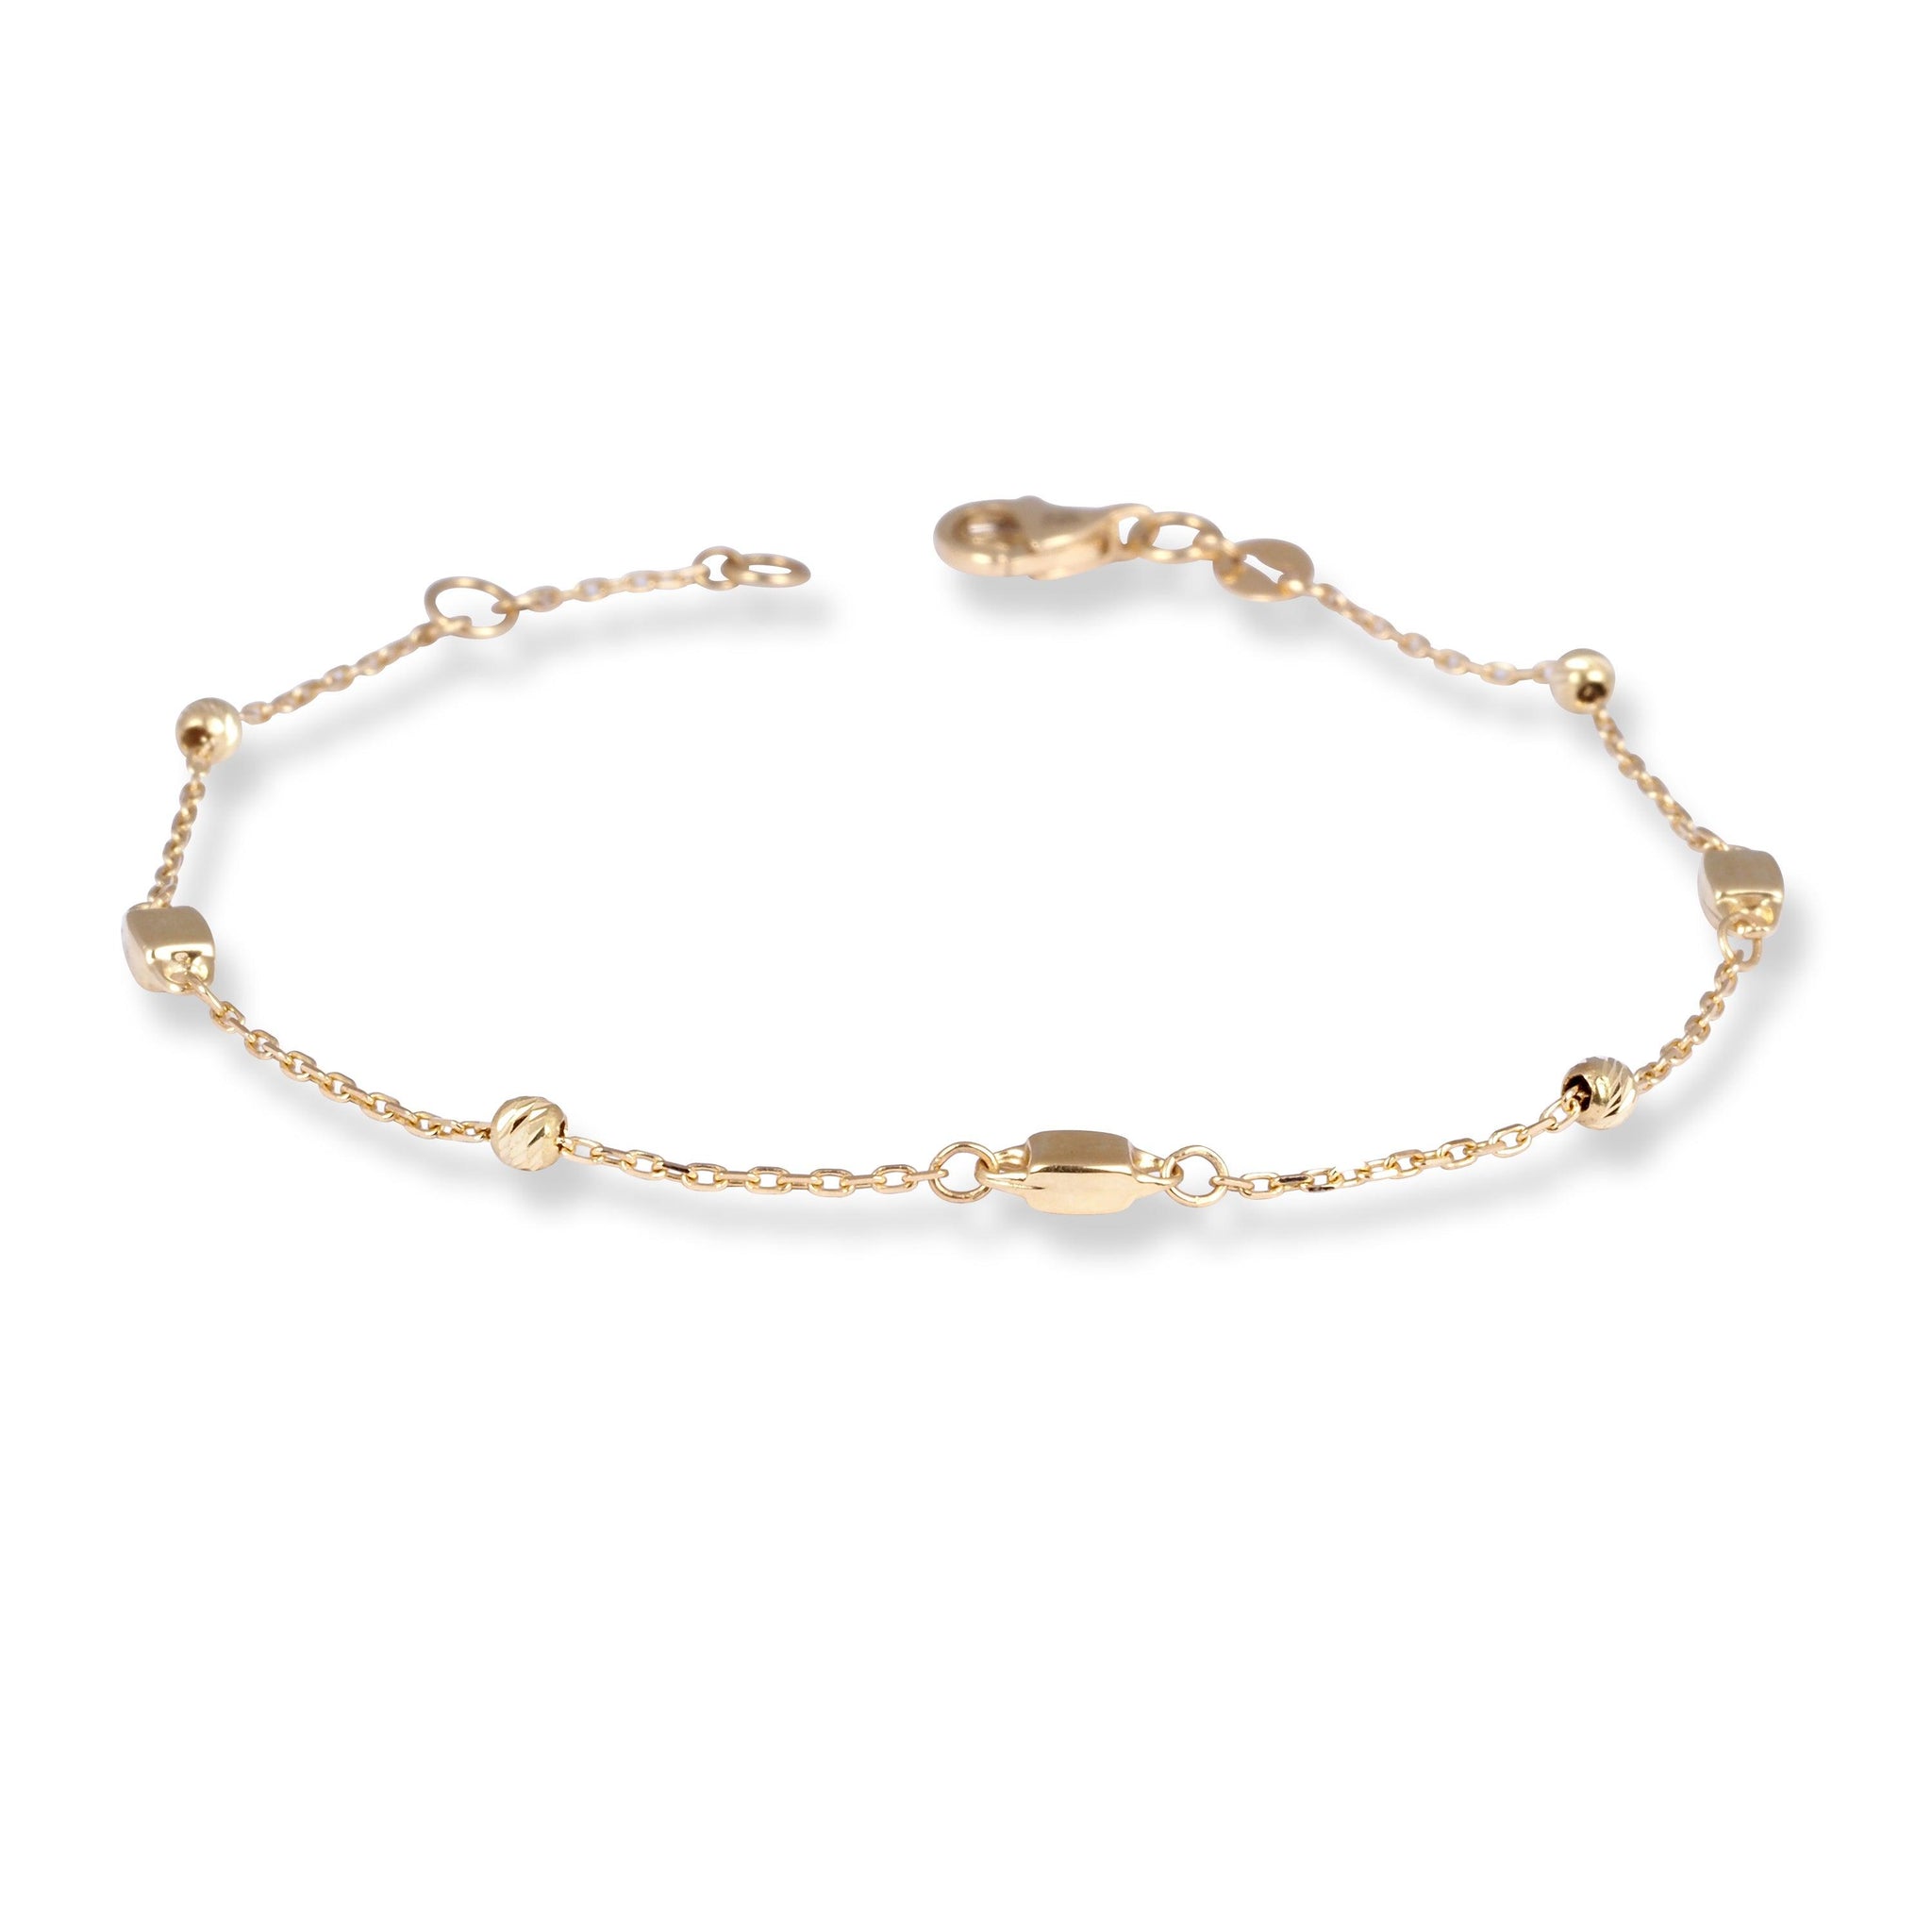 18ct Yellow Gold Bracelet with Two Typed of Beads and Lobster Clasp LBR-8488